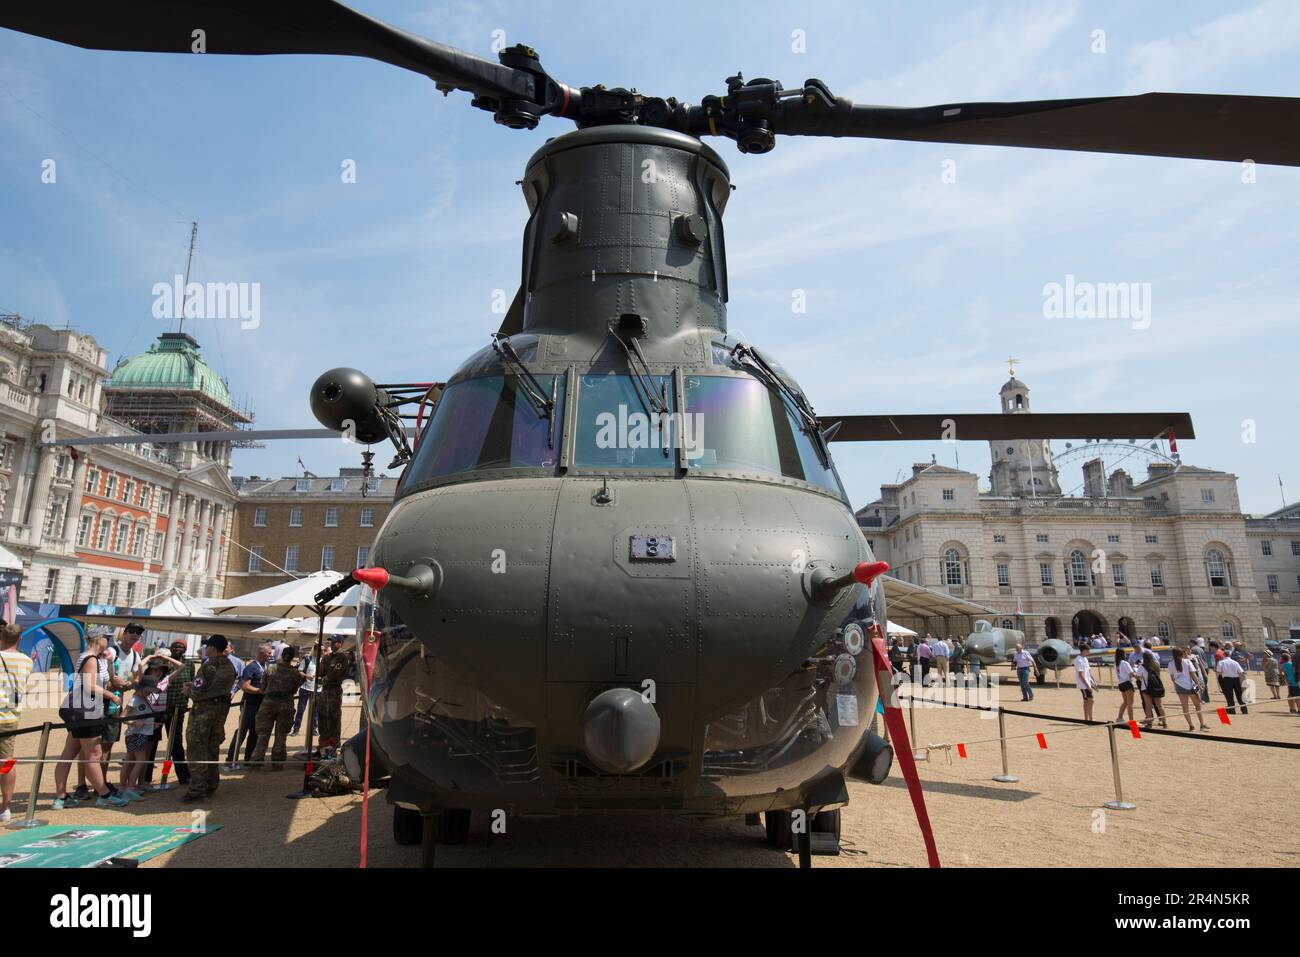 RAF Chinook helicopter on display in Horse Guards Parade as part of the RAF100 tour (100th Birthday of the RAF) Stock Photo